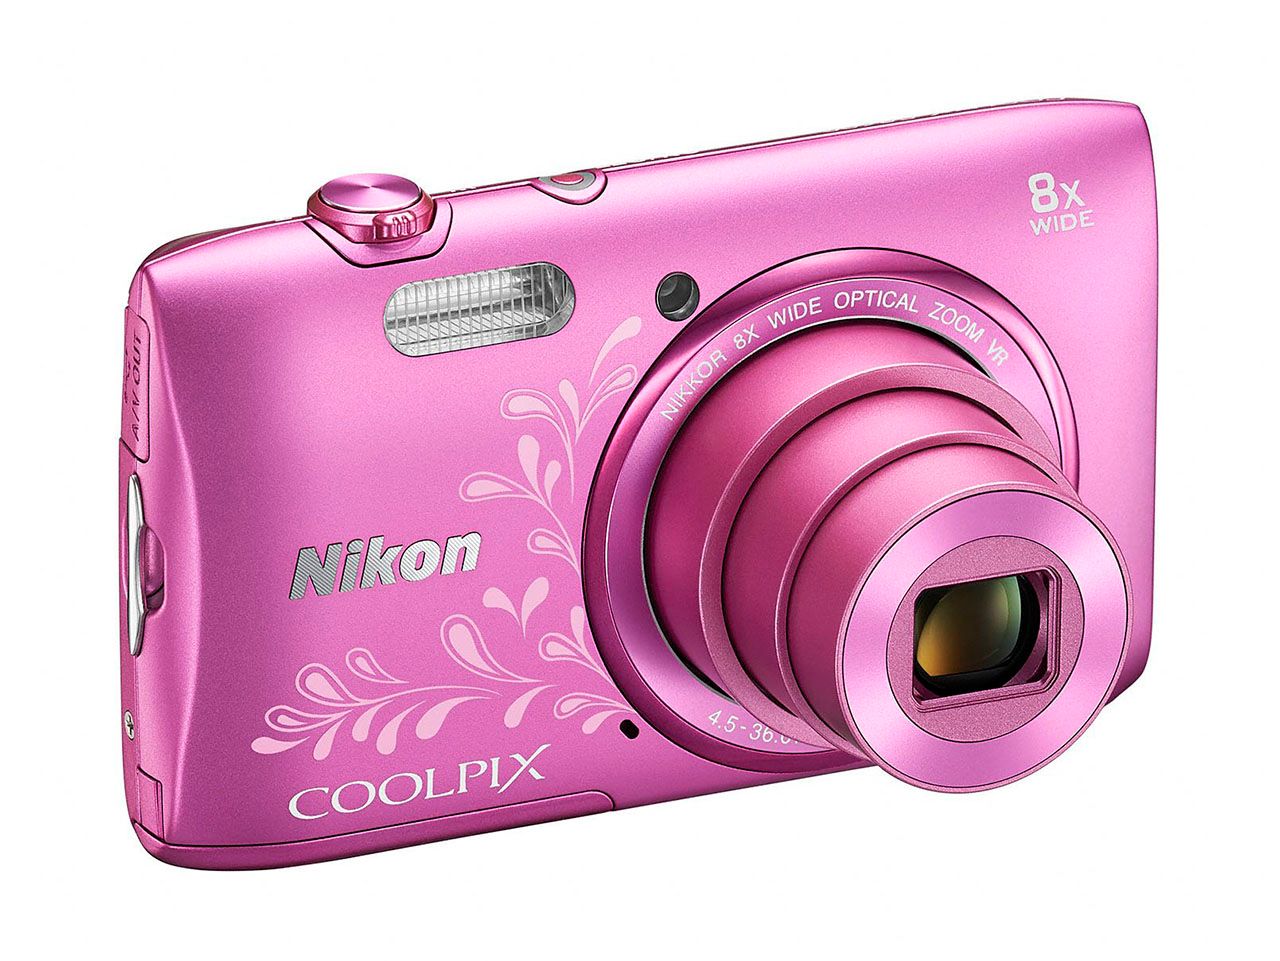 nikon coolpix s6700 s3600 and s2800 compacts have been on the slimline tonic image 2